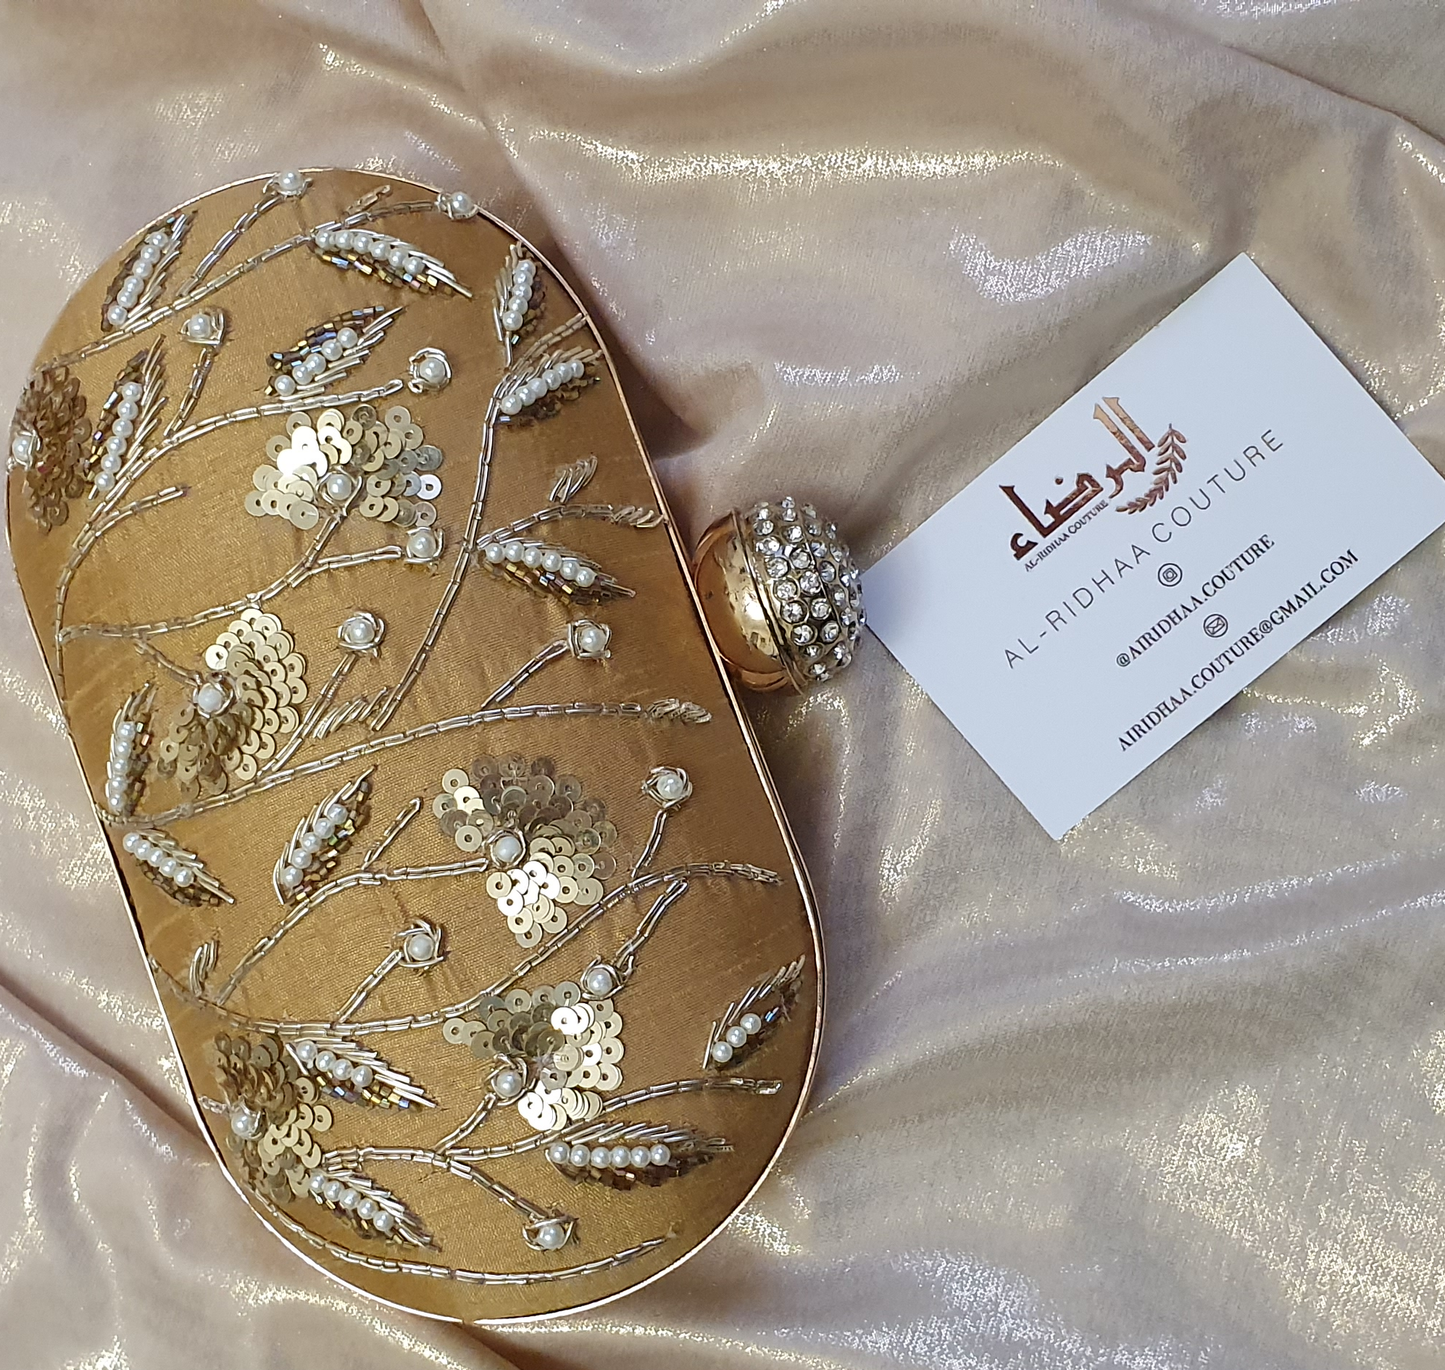 Small Oval Embroidered Clutch